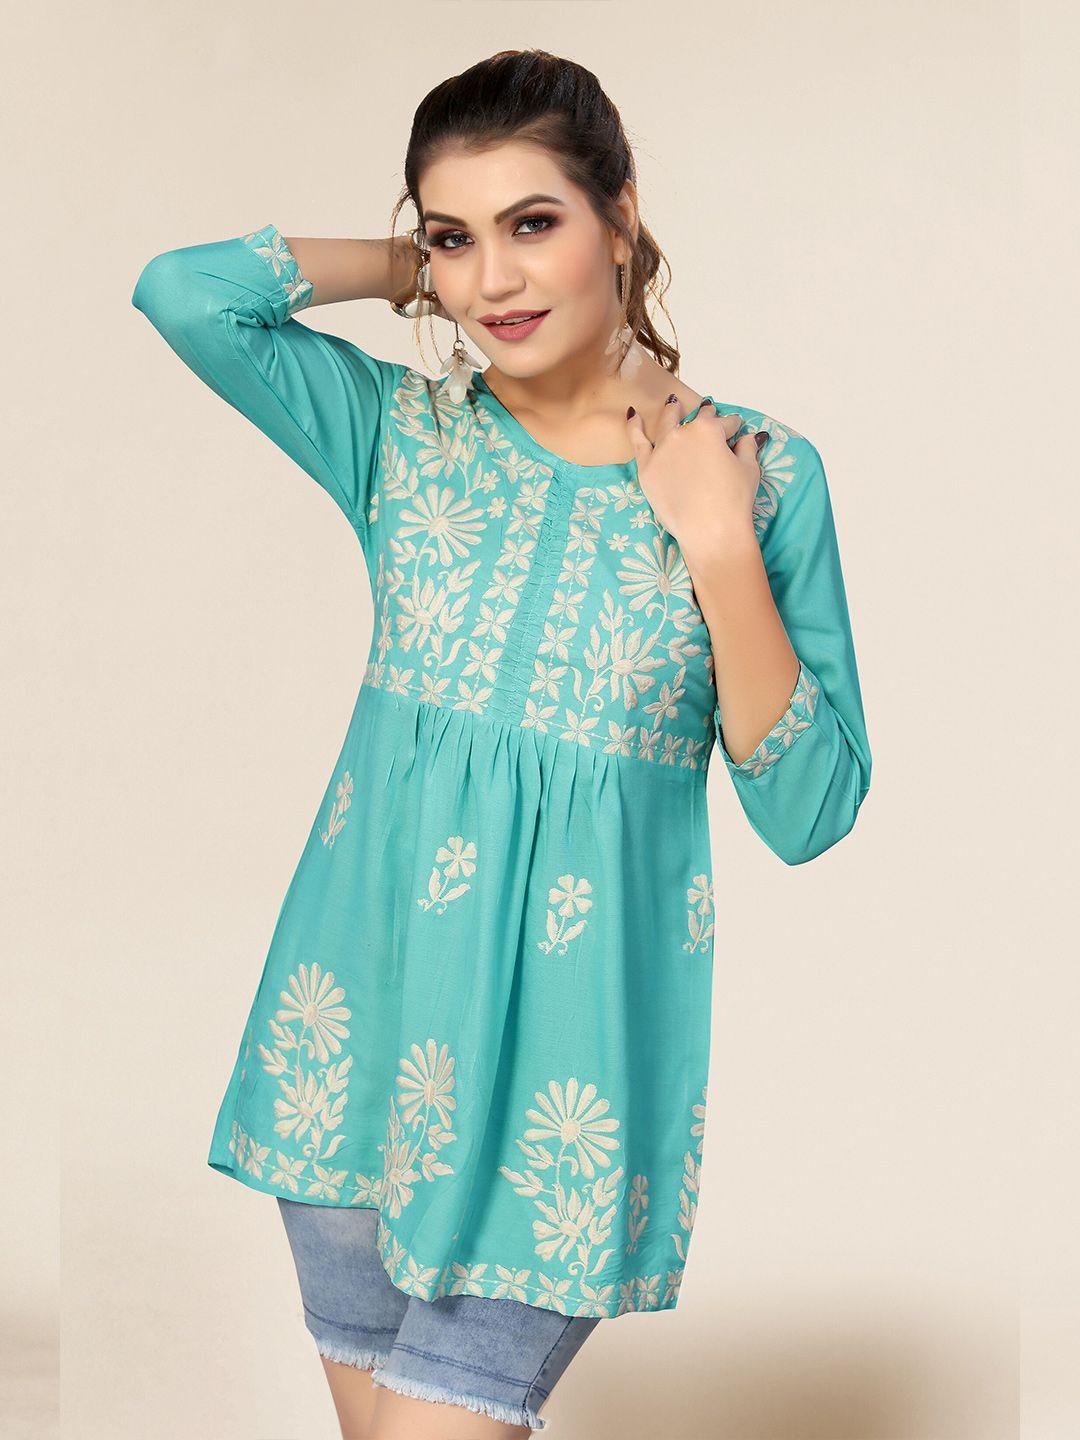 winza-designer-turquoise-blue-floral-print-top